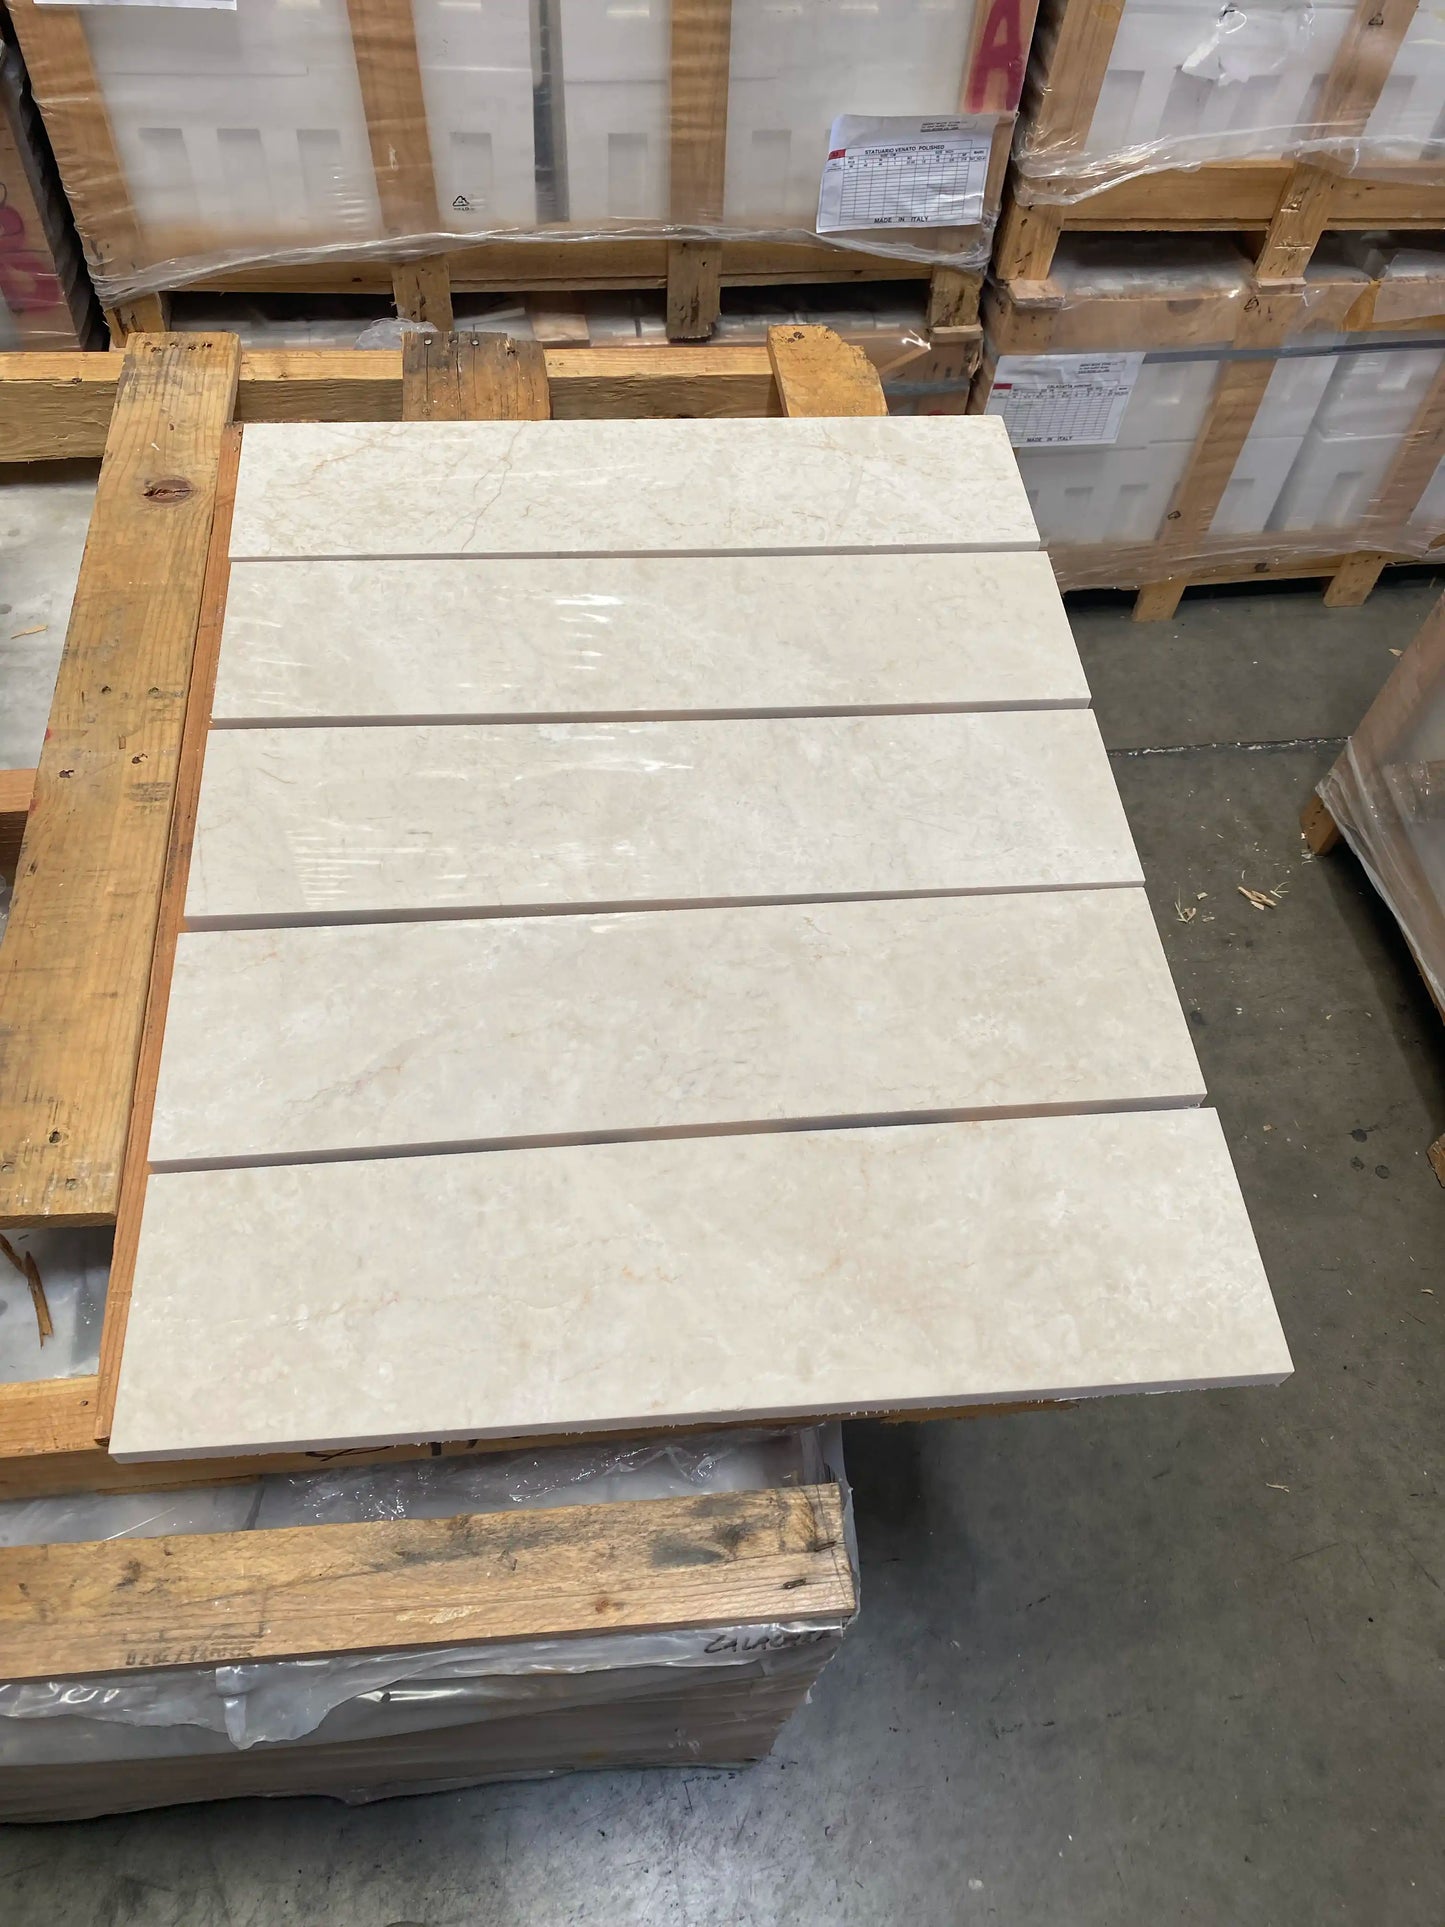 Noble White Cream Wall and Floor Tile 6x24"